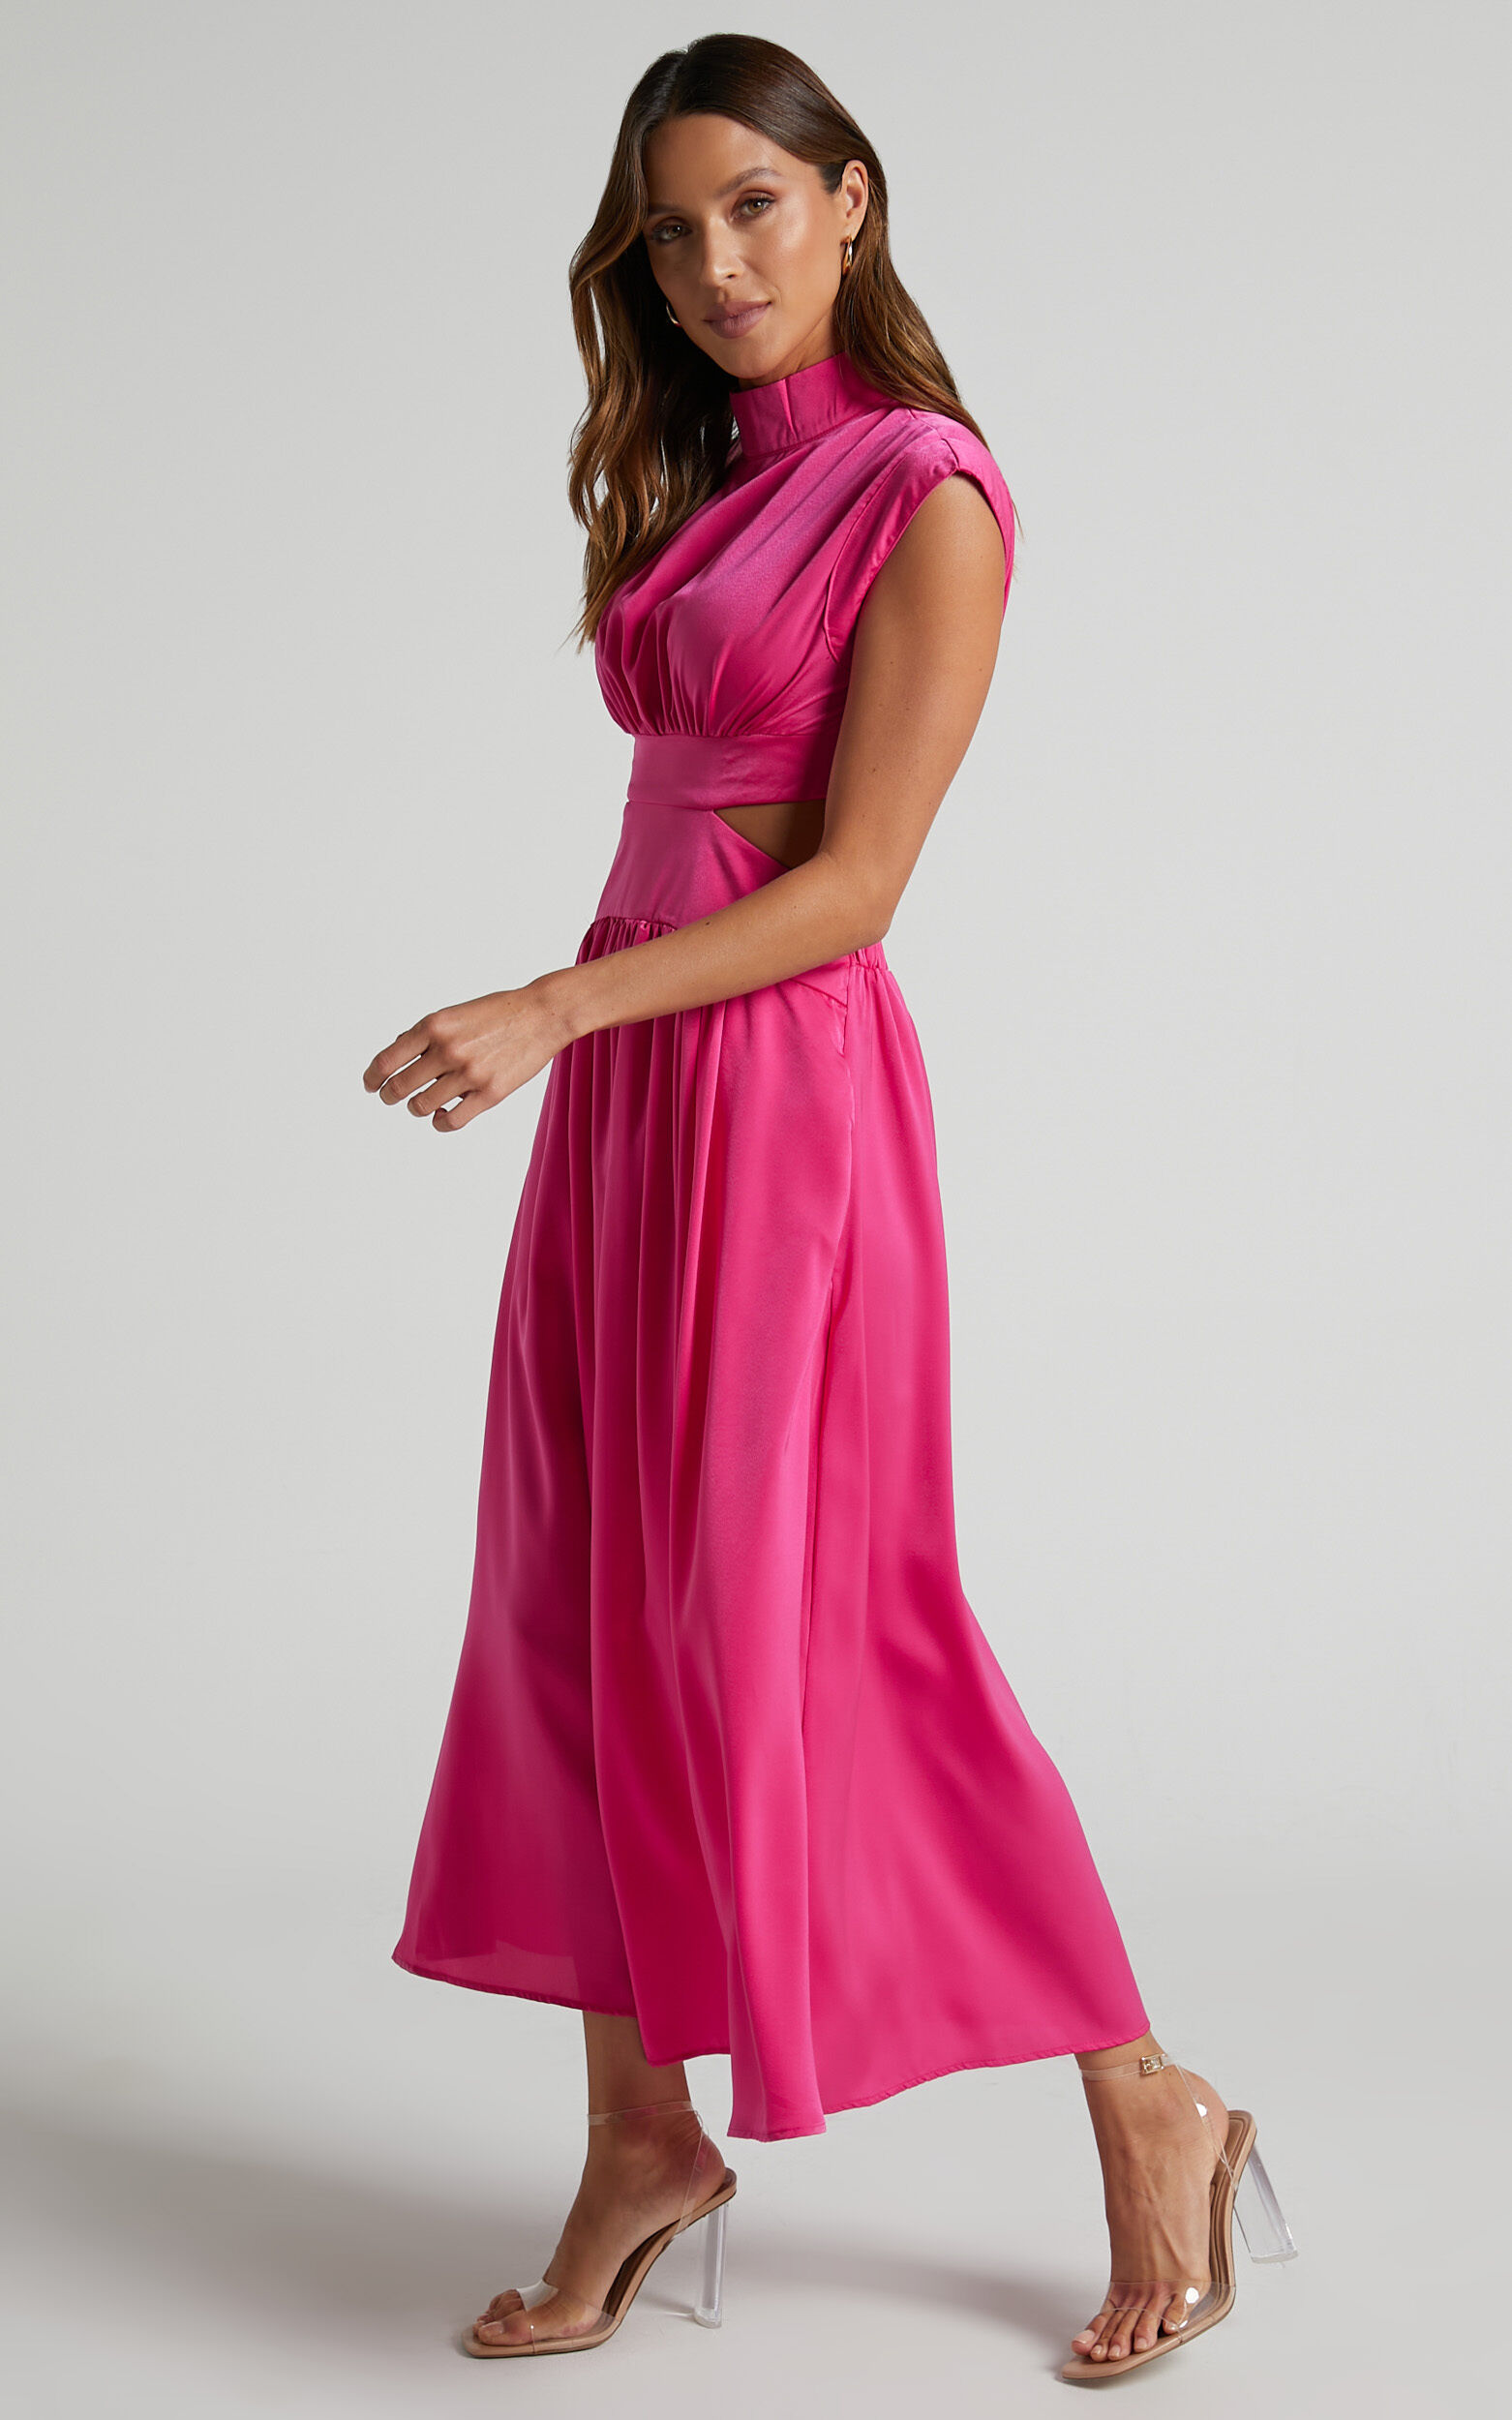 Natalyah Midi Dress - Mock Neck Cut Out Gathered Dress in Pink